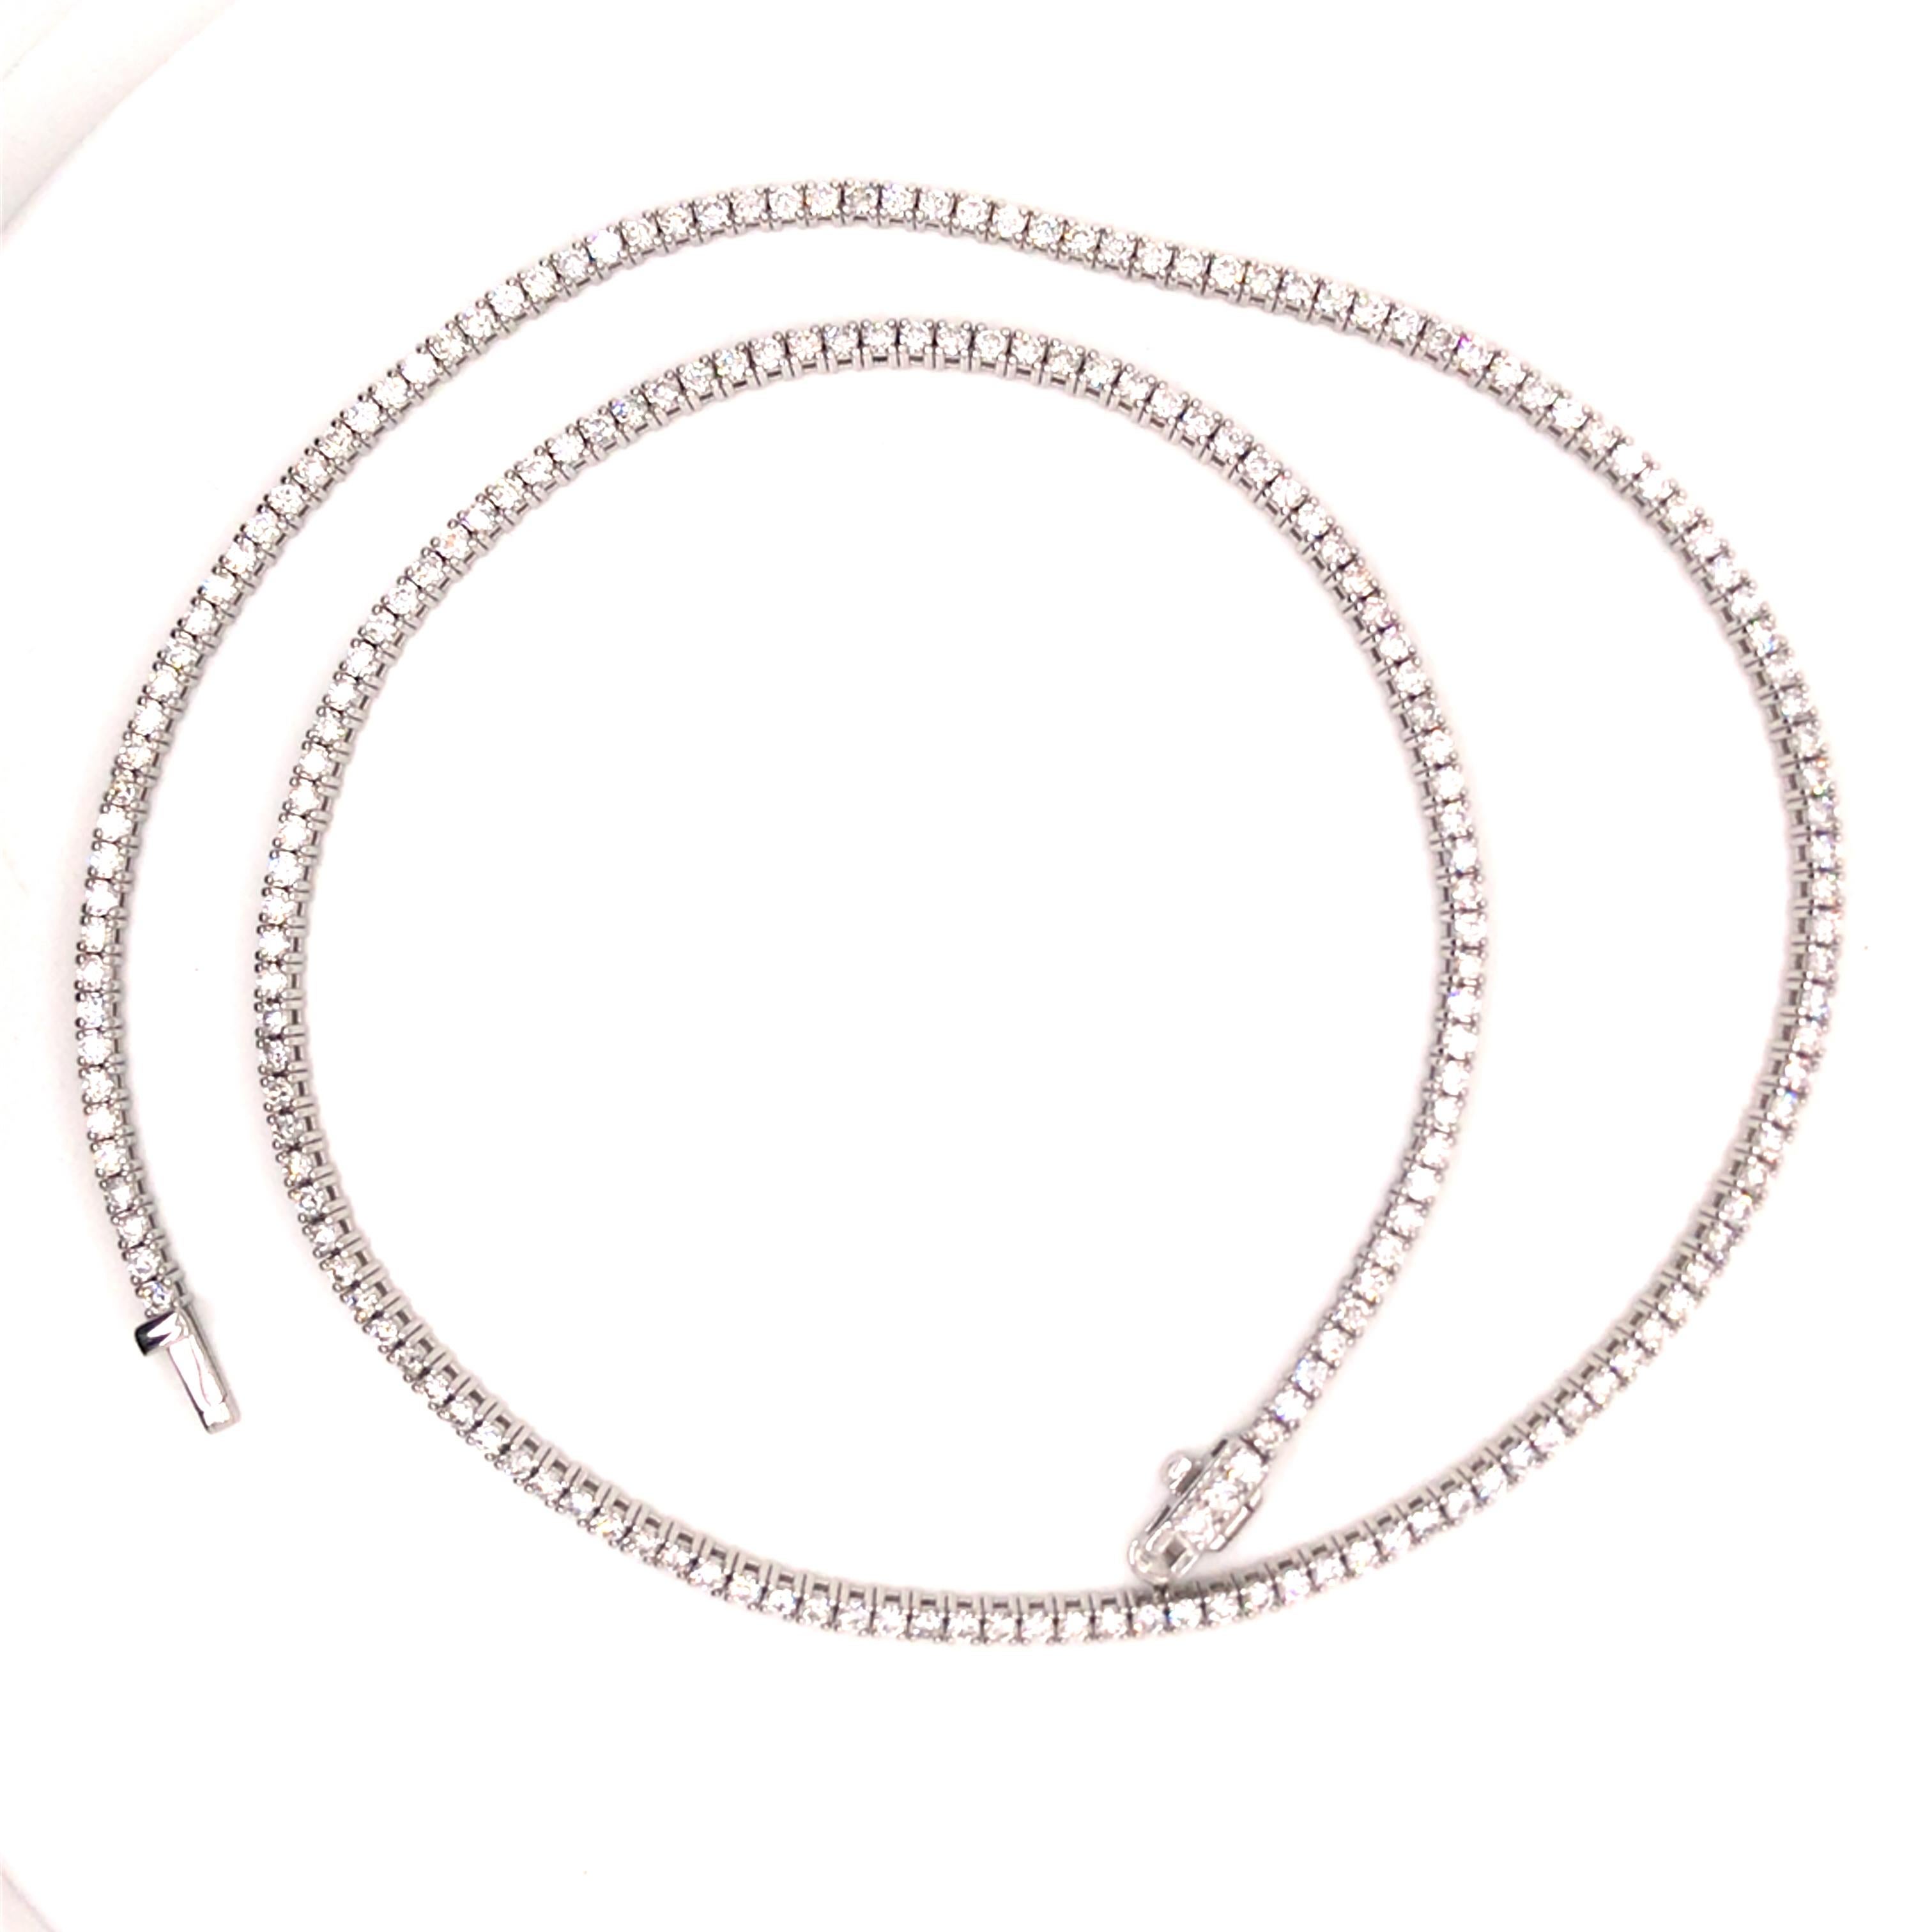 Diamond Tennis Necklace in 14K White Gold.  Round Brilliant Cut Diamonds weighing 4.59 carat total weight, G-I in color and SI in clarity are expertly set.  The Necklace measures 17 1/4 inch in length.  15.9 grams.